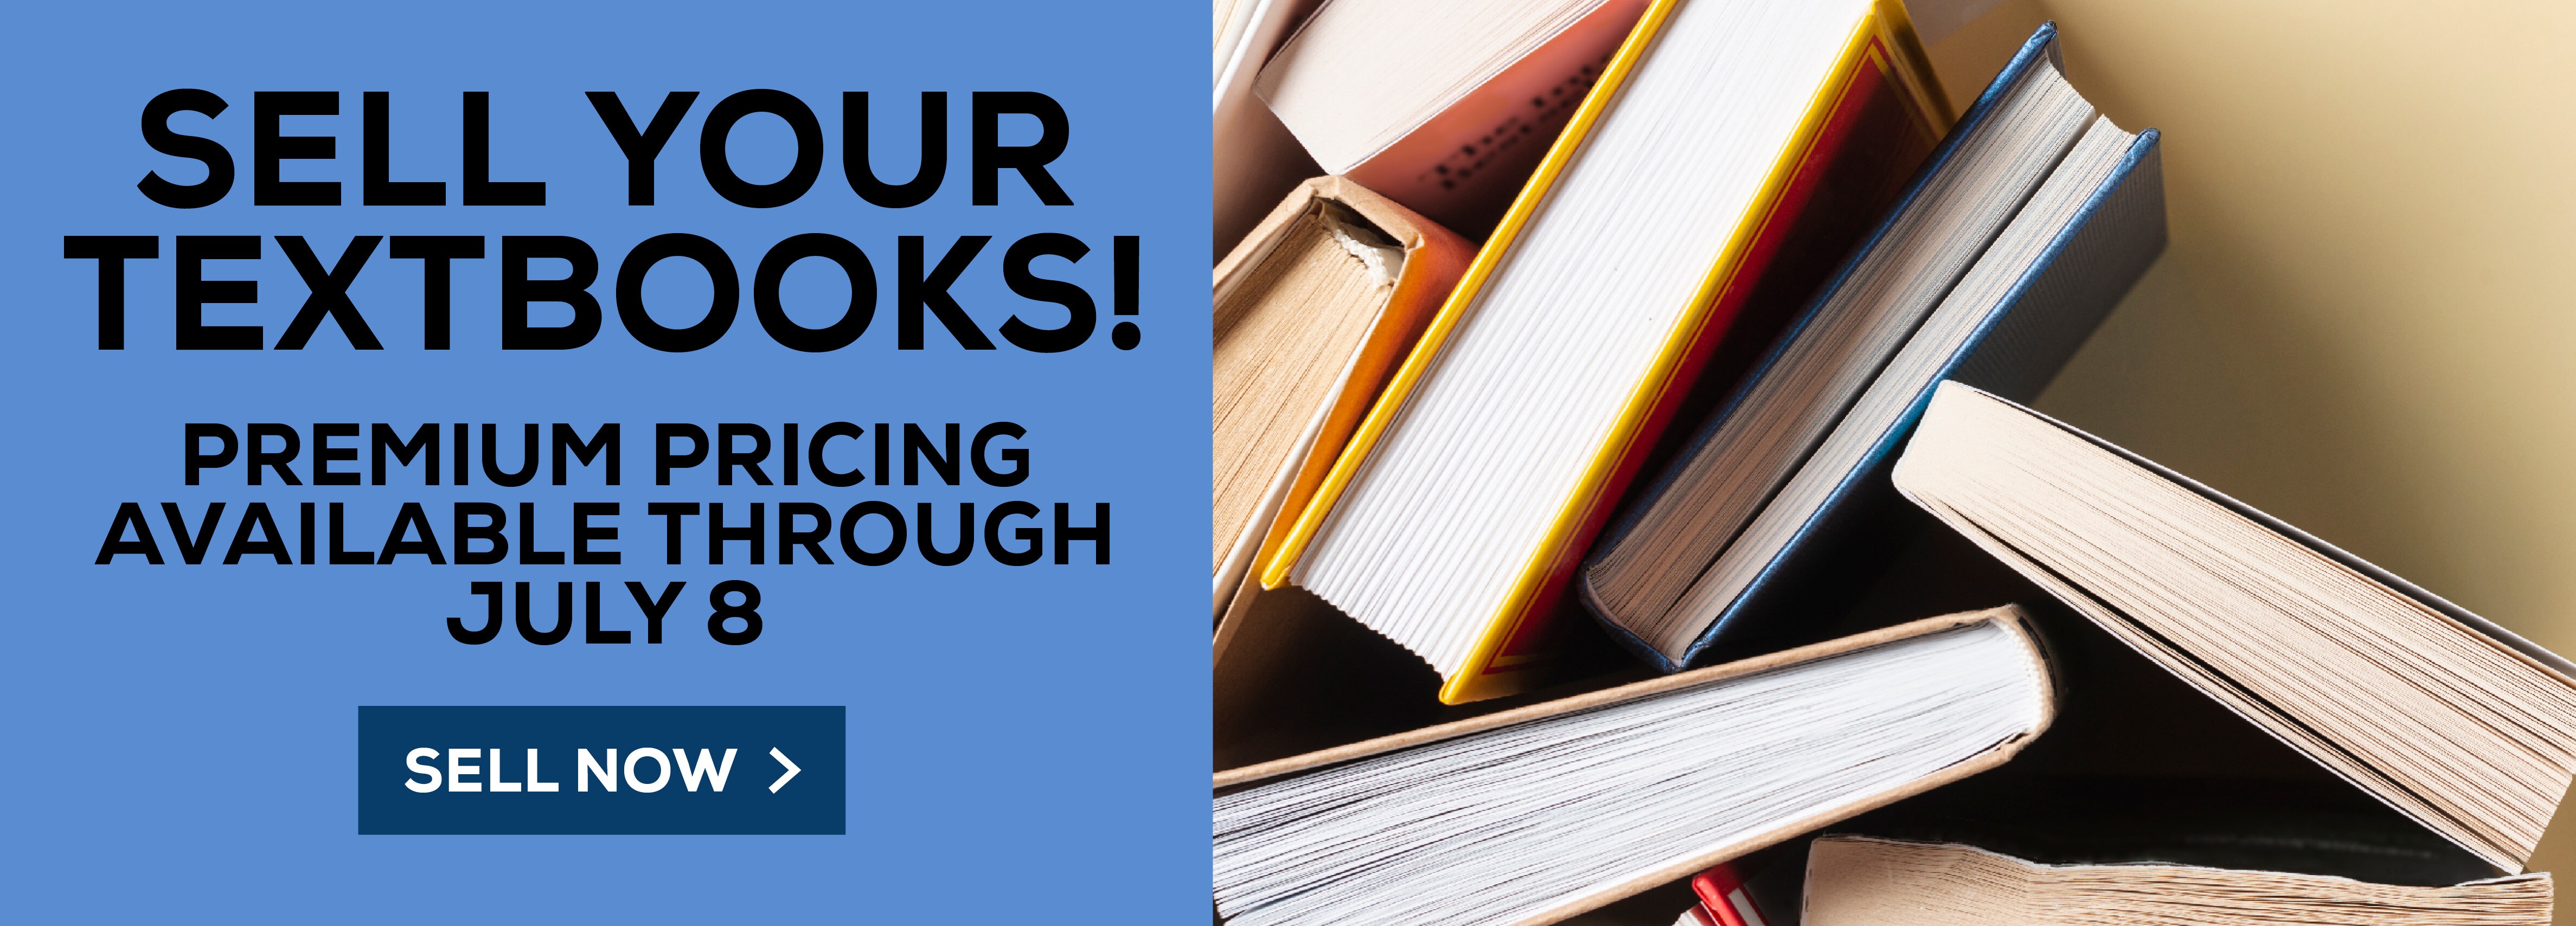 Sell Your Textbooks! Premium pricing available through July 8. Sell Now!					